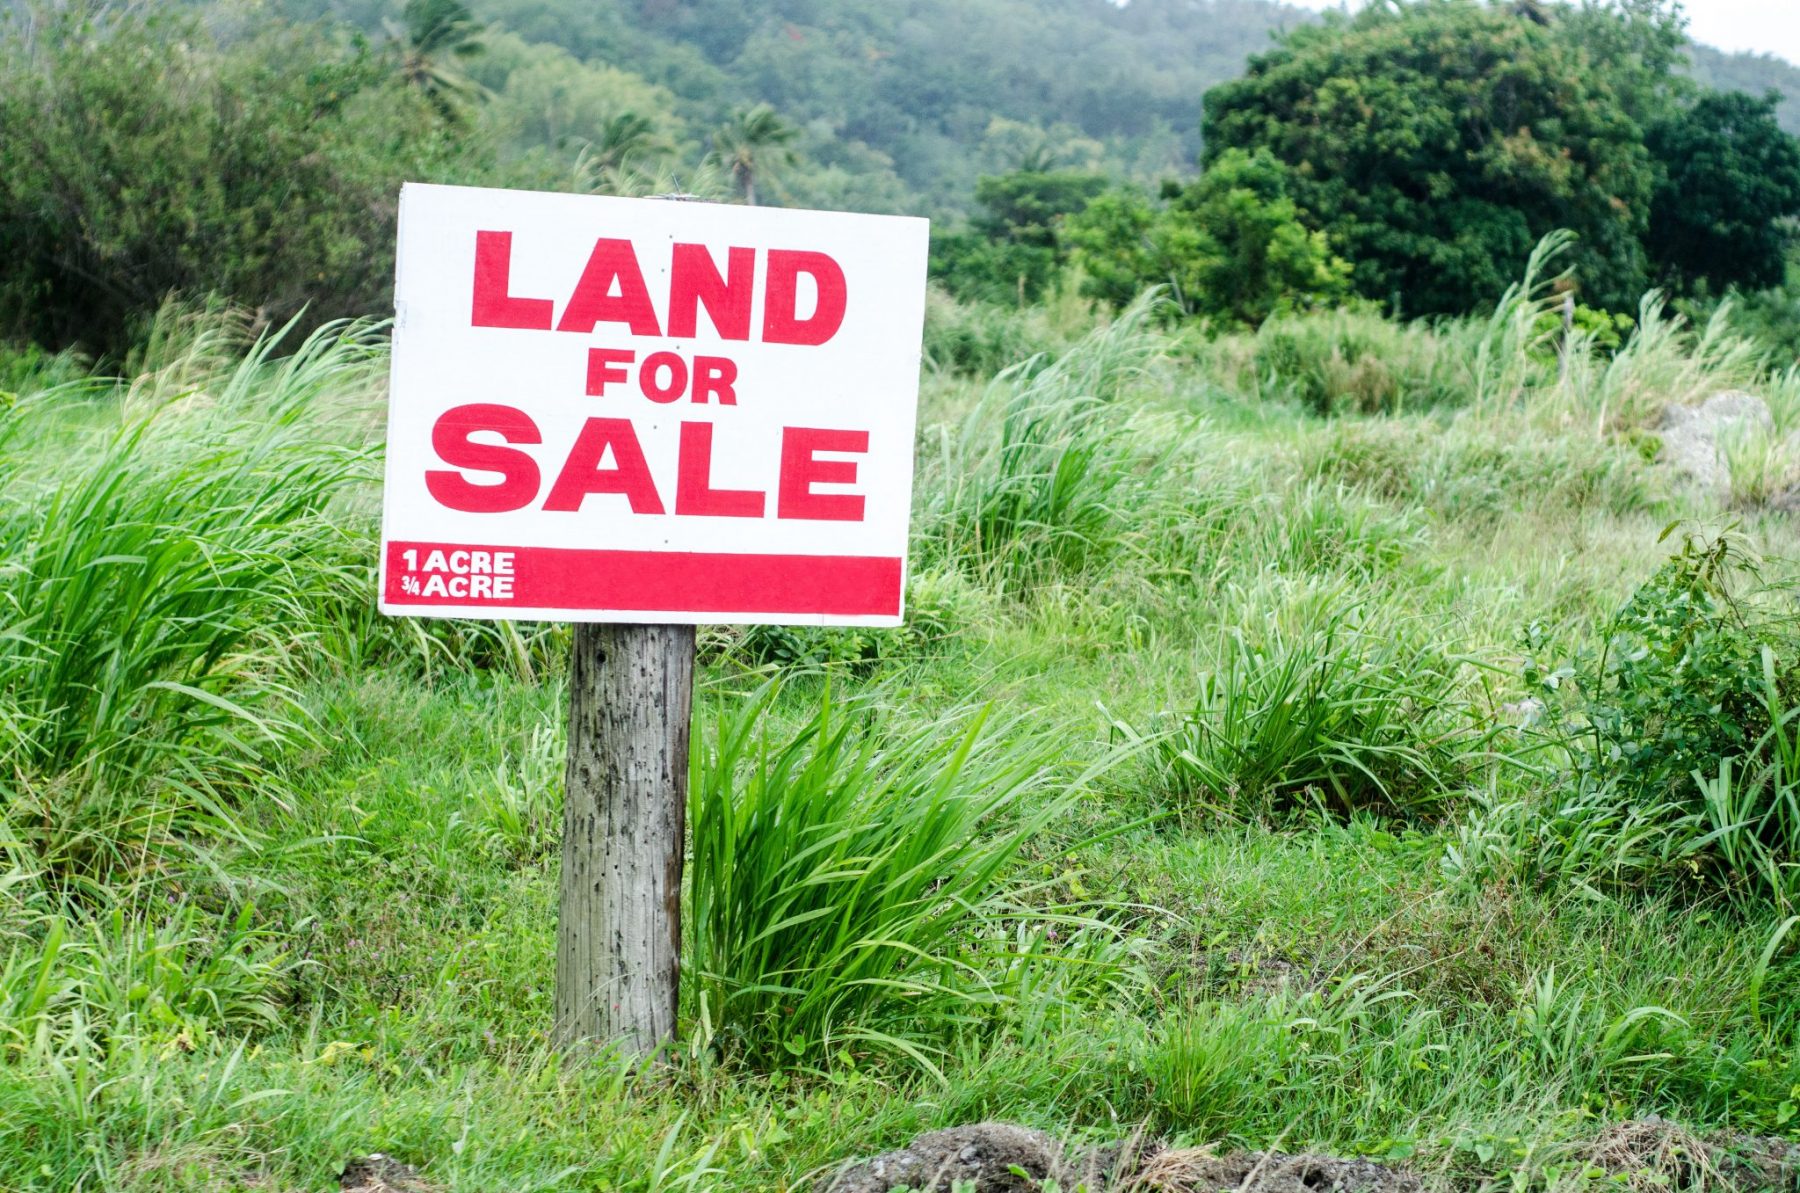 Land For Sale Sign In Grassy Lot